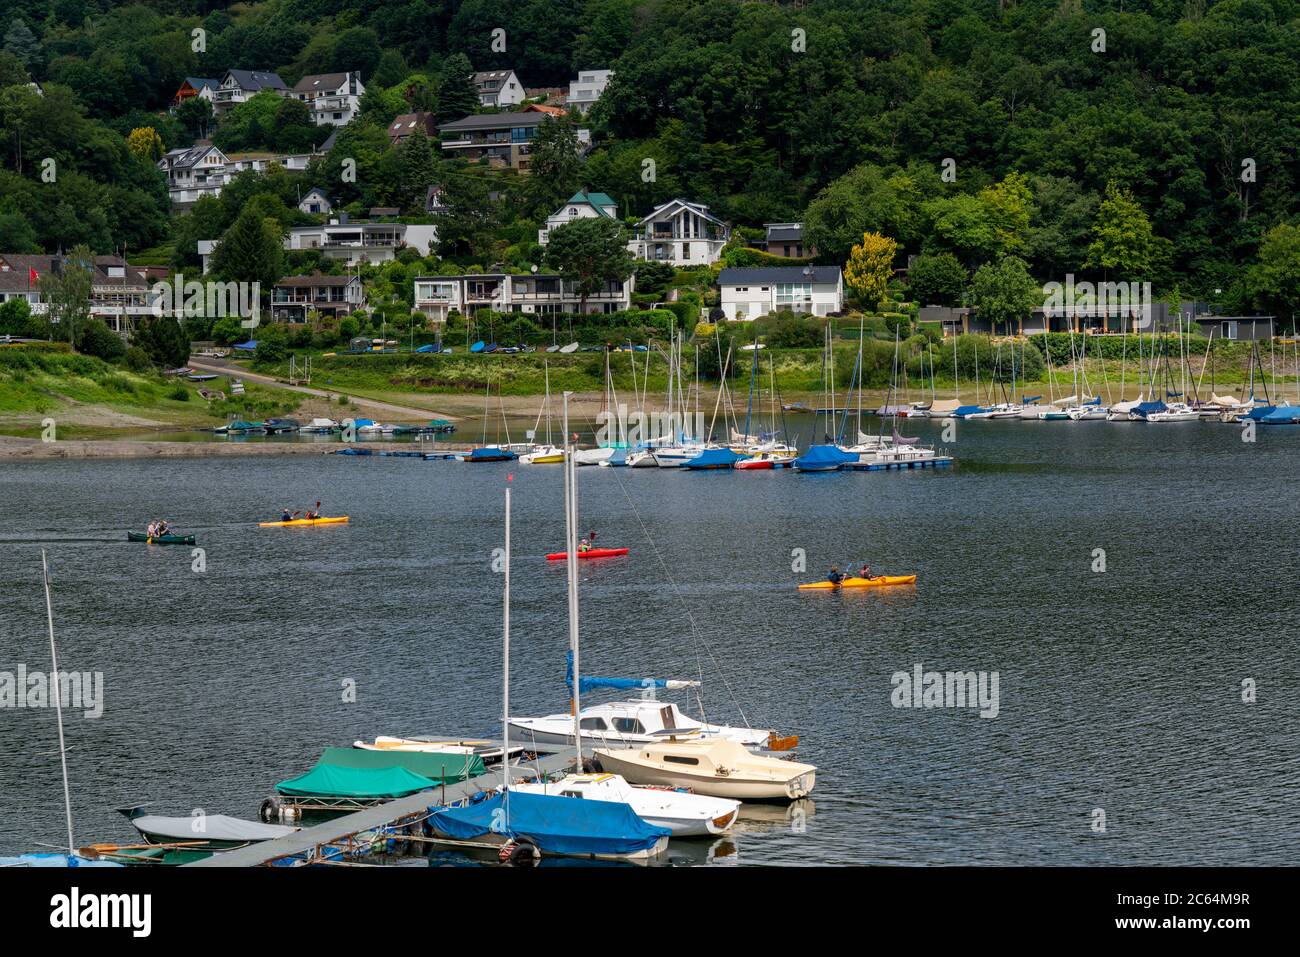 Rursee lake, a reservoir, the village of Woffelsbach, camping ground,  jetties, bathing bay, Nationalpark Eifel, NRW, Germany Stock Photo - Alamy